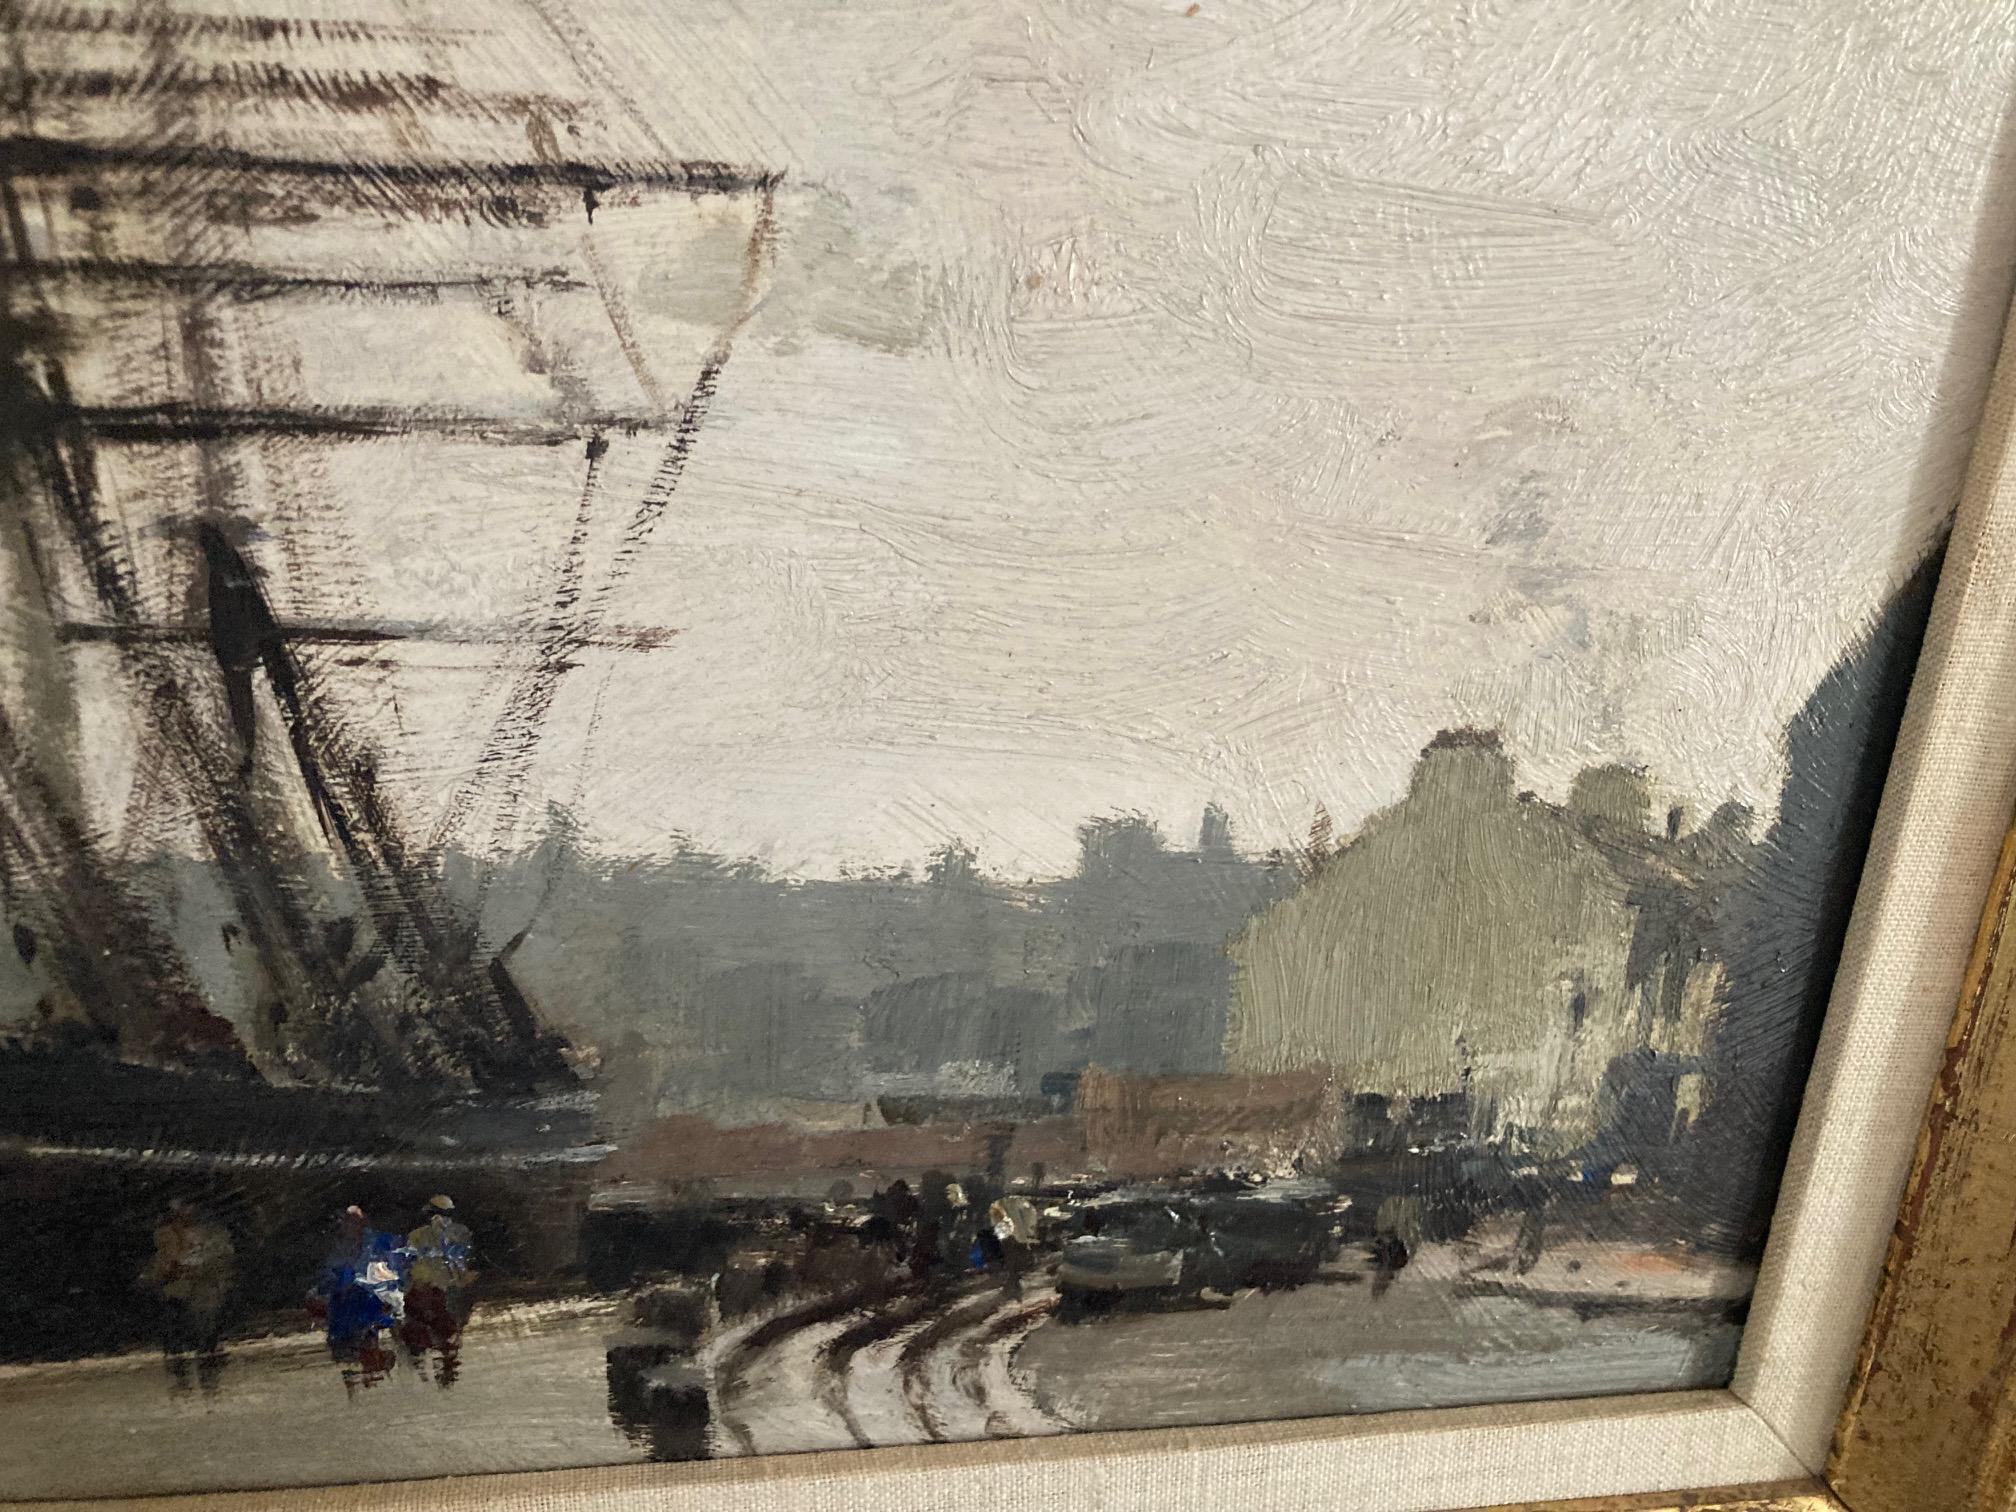 Oil on panel.  A wonderful painting of the iconic ship the  Cutty Sark.  A subject that Seago returned to frequently.  Works by this most important 20th Century Artist are extremely popular and highly sought after.
Housed in it's original linen and